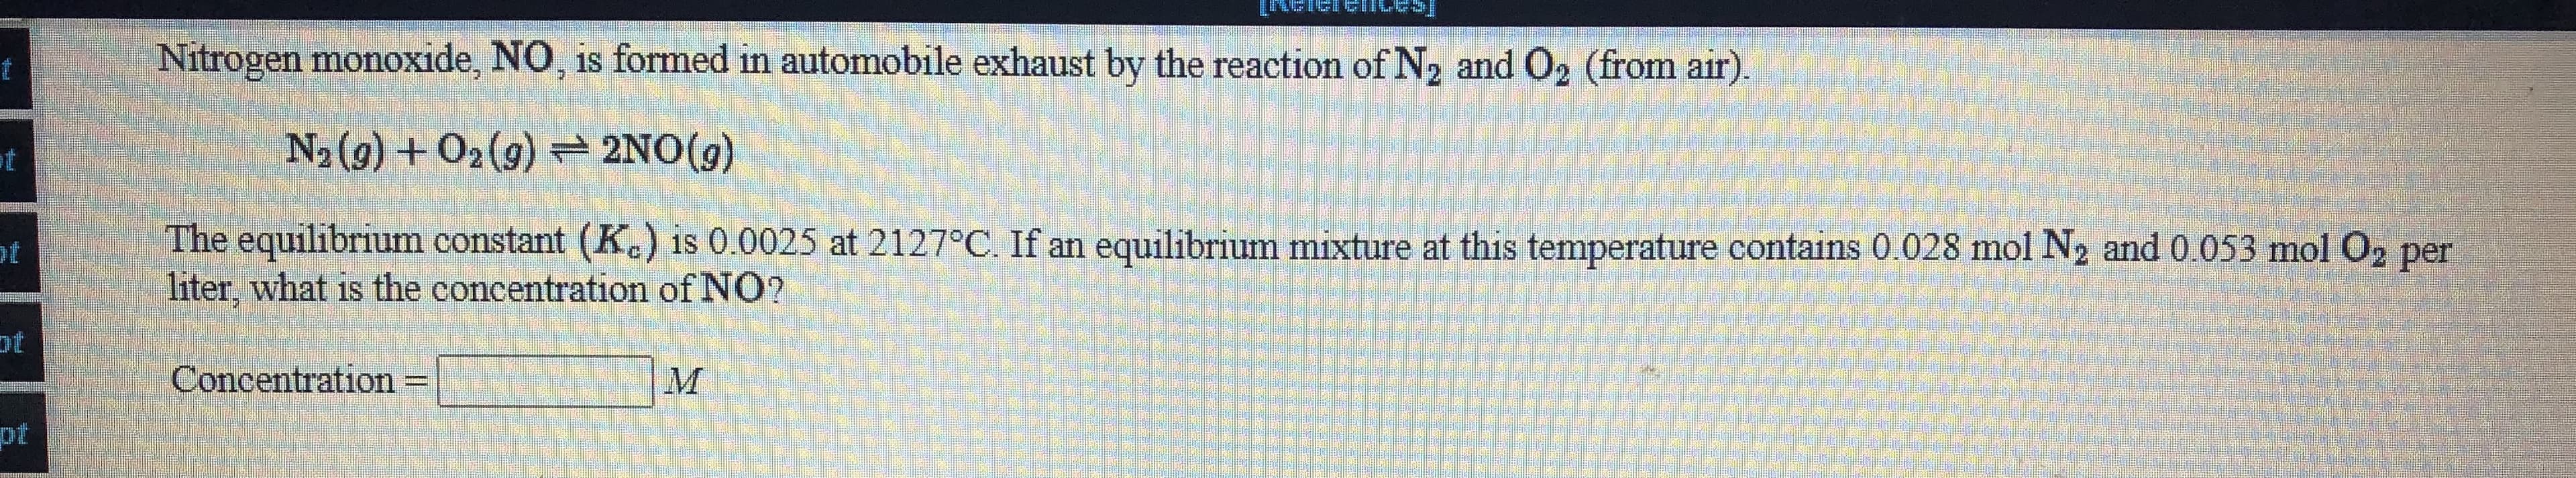 The equilibrium constant (K.) is 0.0025 at 2127°C. If an equilibrium mixture at this temperature contains 0.028 mol N2 and 0.053 mol O2 per
liter, what is the concentration of NO?
